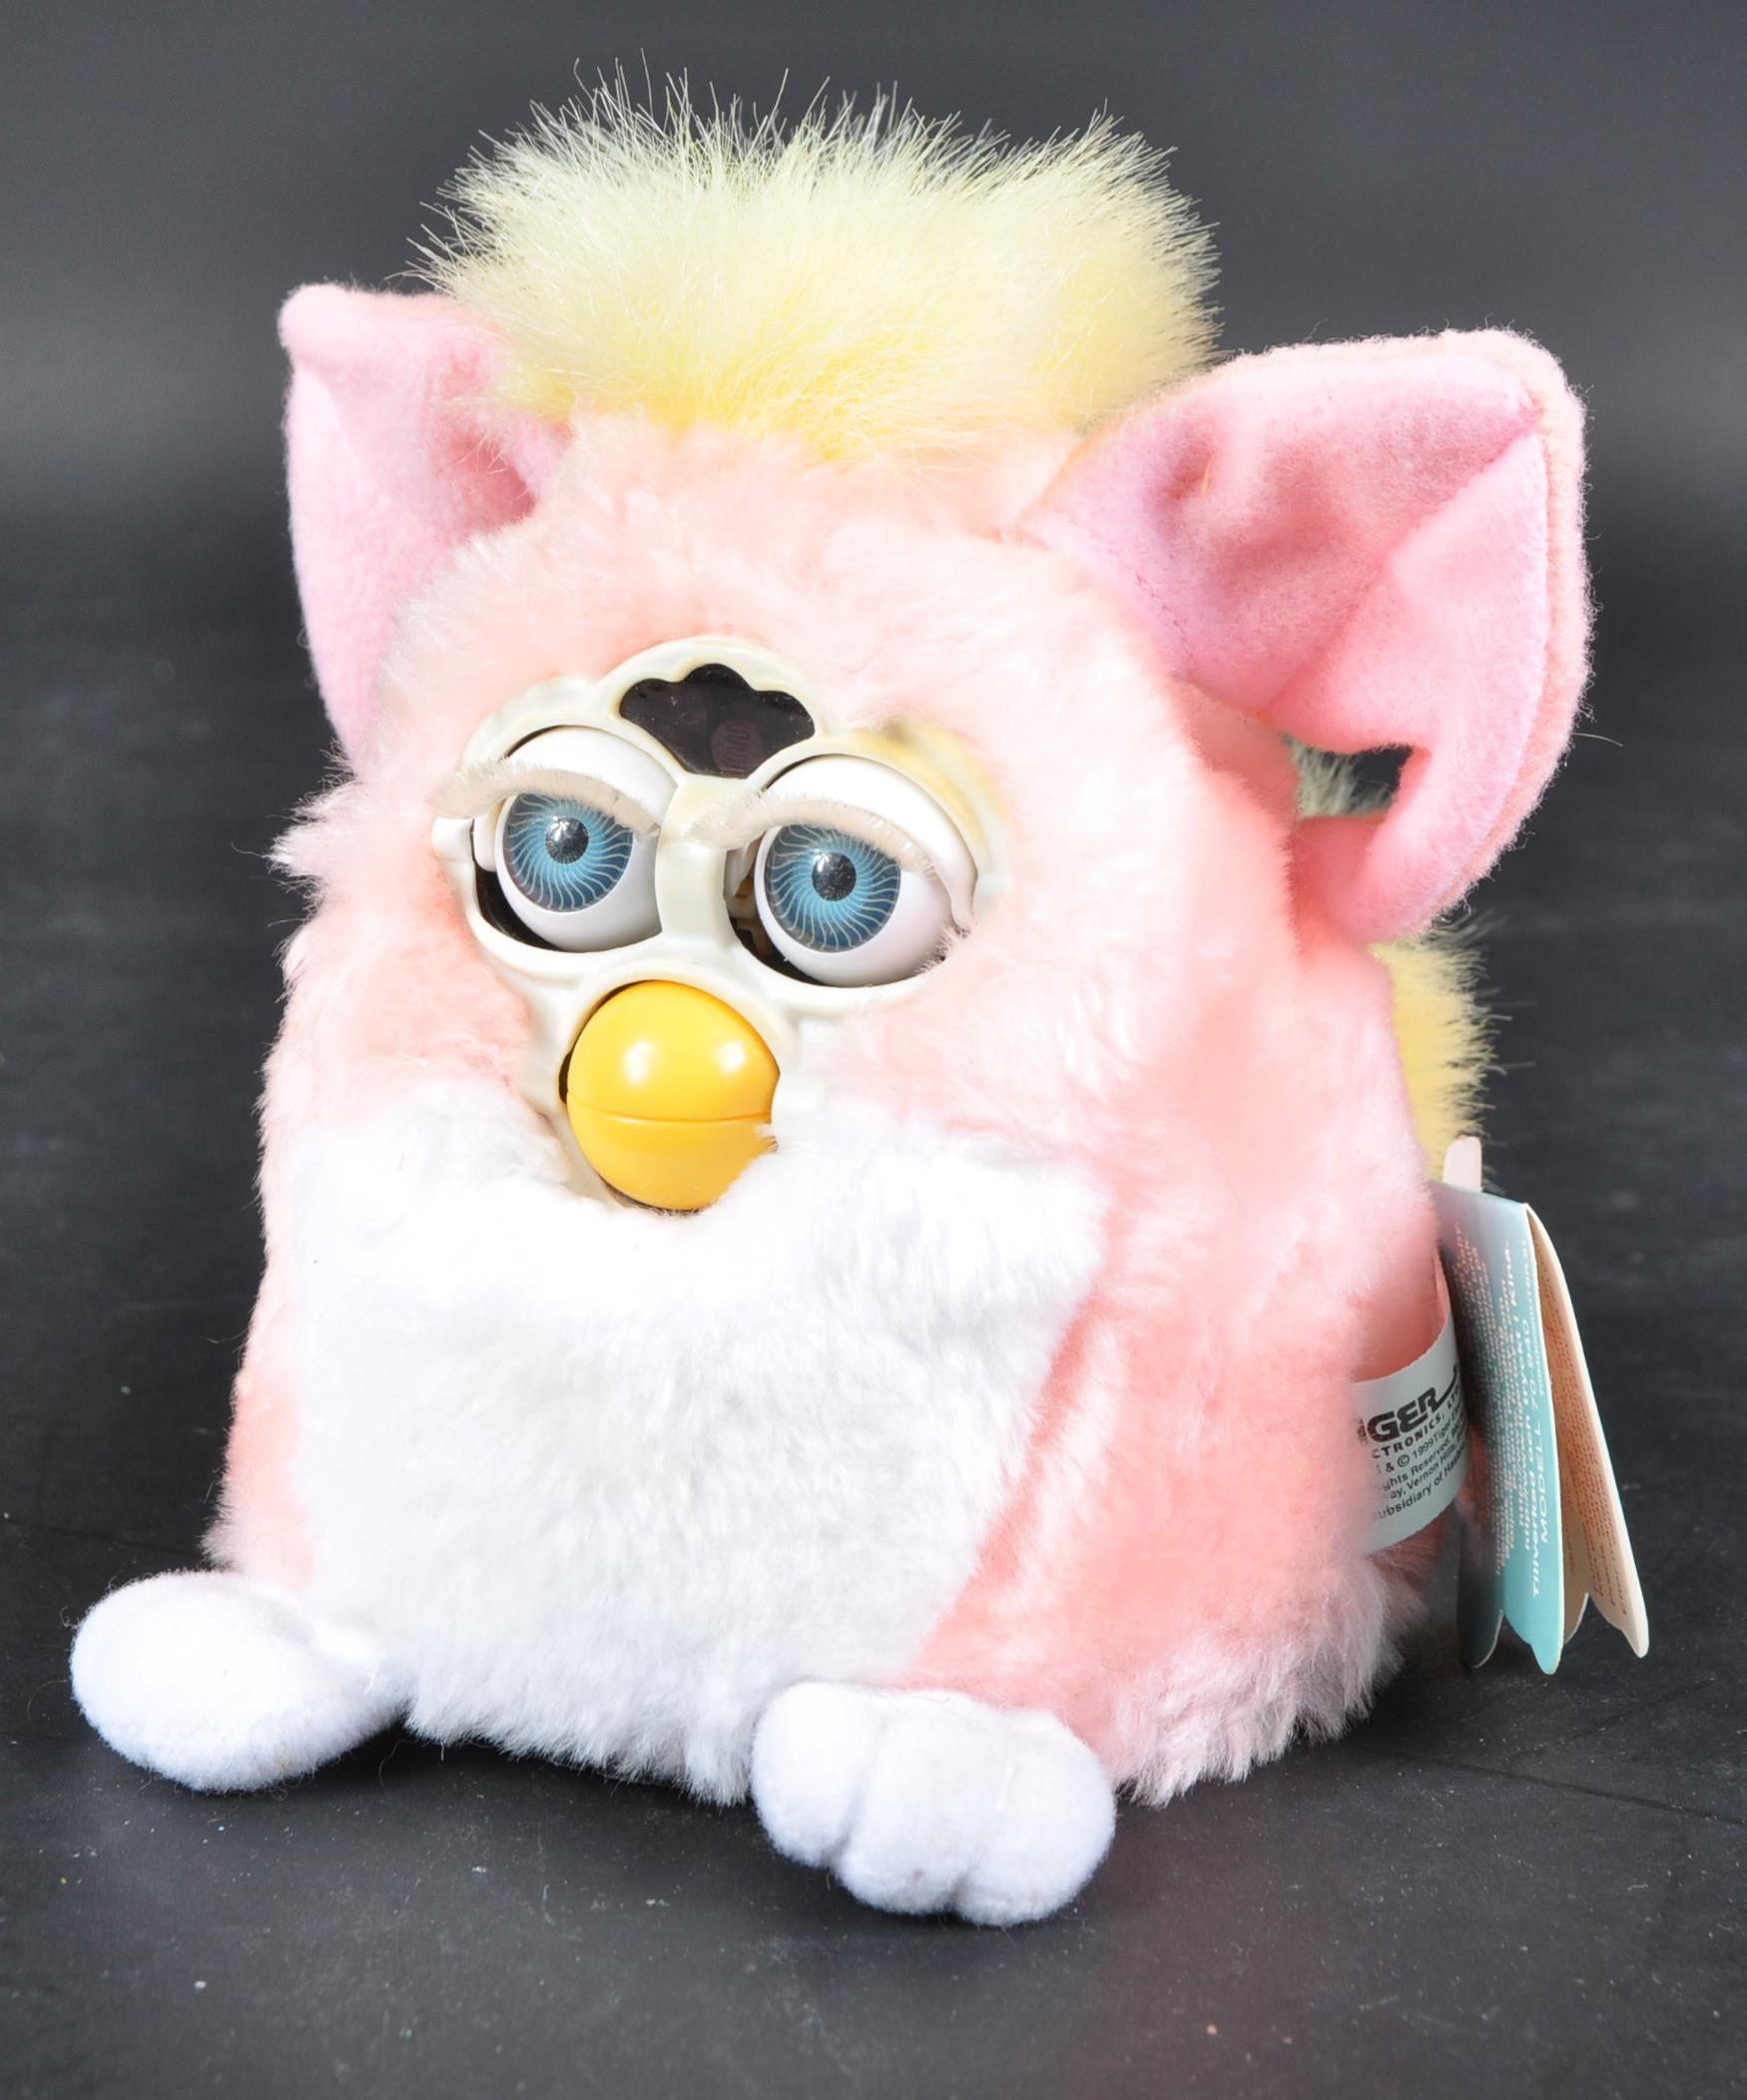 BOXED HASBRO MADE TIGER ELECTRONICS INTERACTIVE SHELBY CLAM & BOXED FURBY BABY - Image 6 of 9